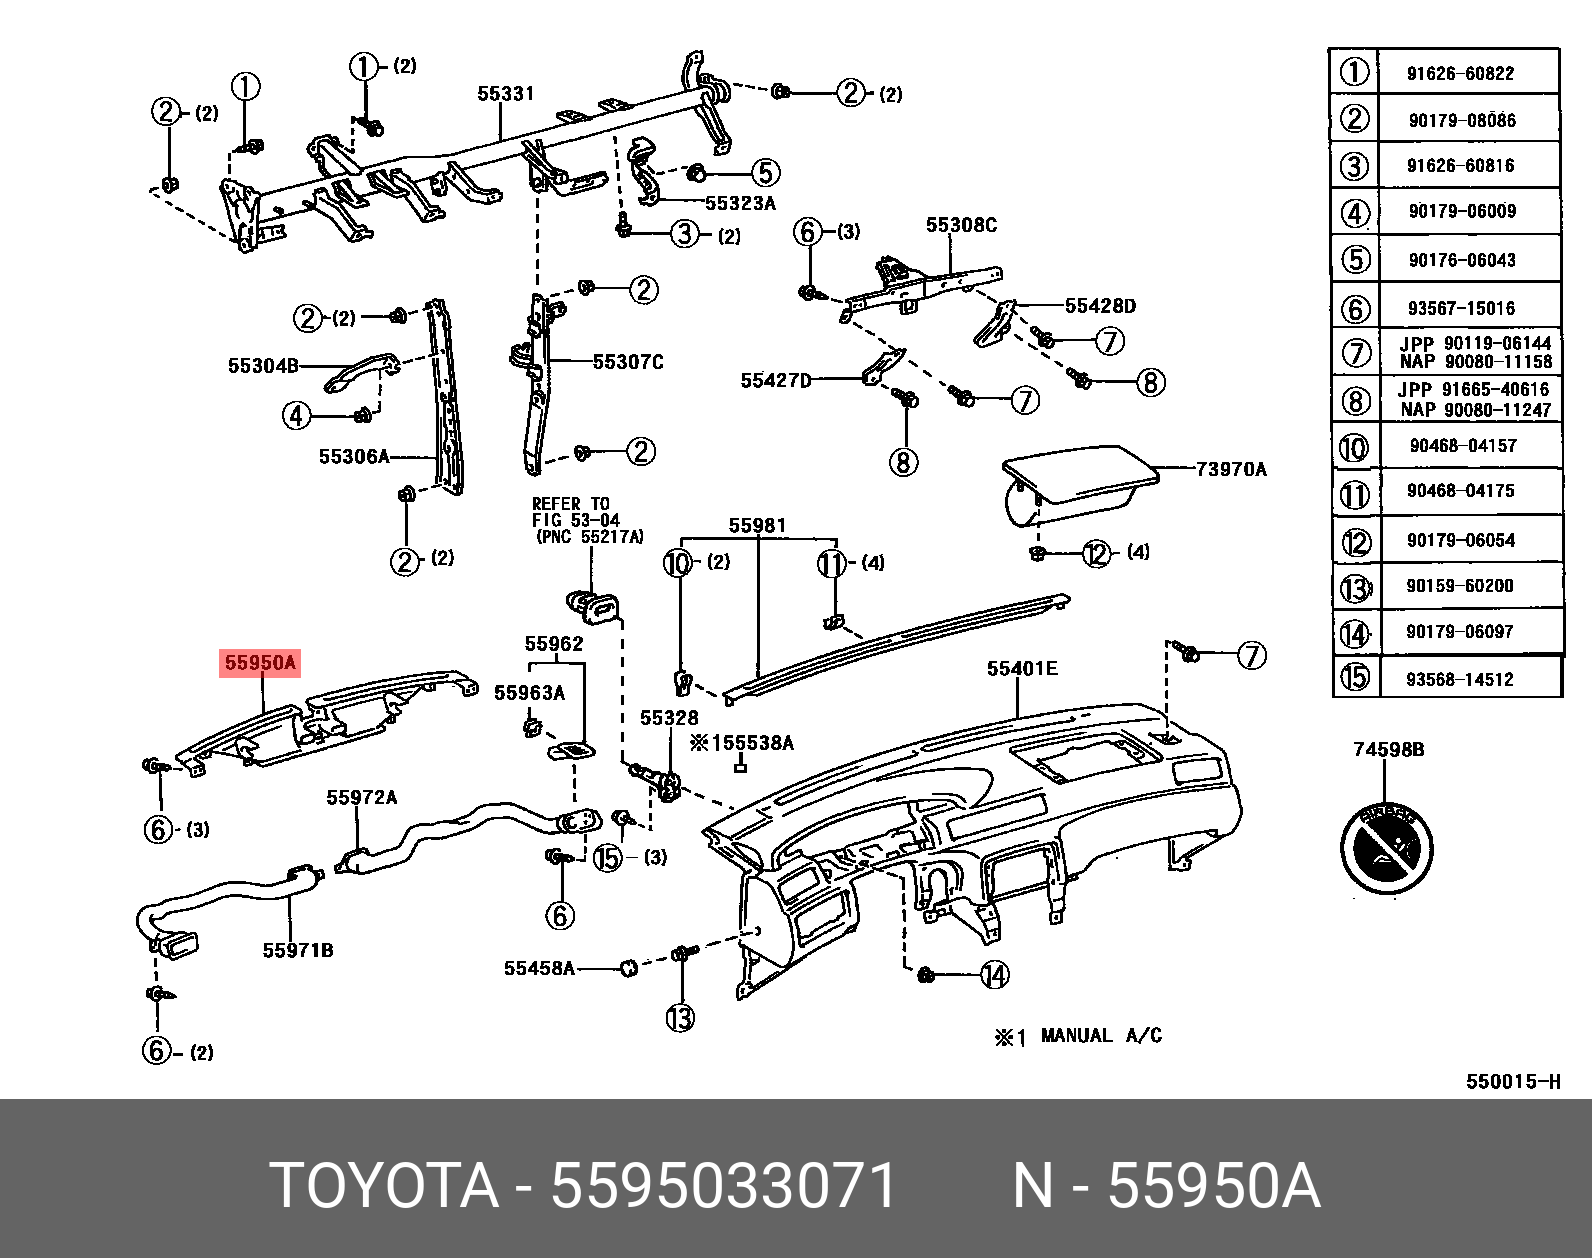 CAMRY GRACIA 199612 - 200109, NOZZLE ASSY, DEFROSTER